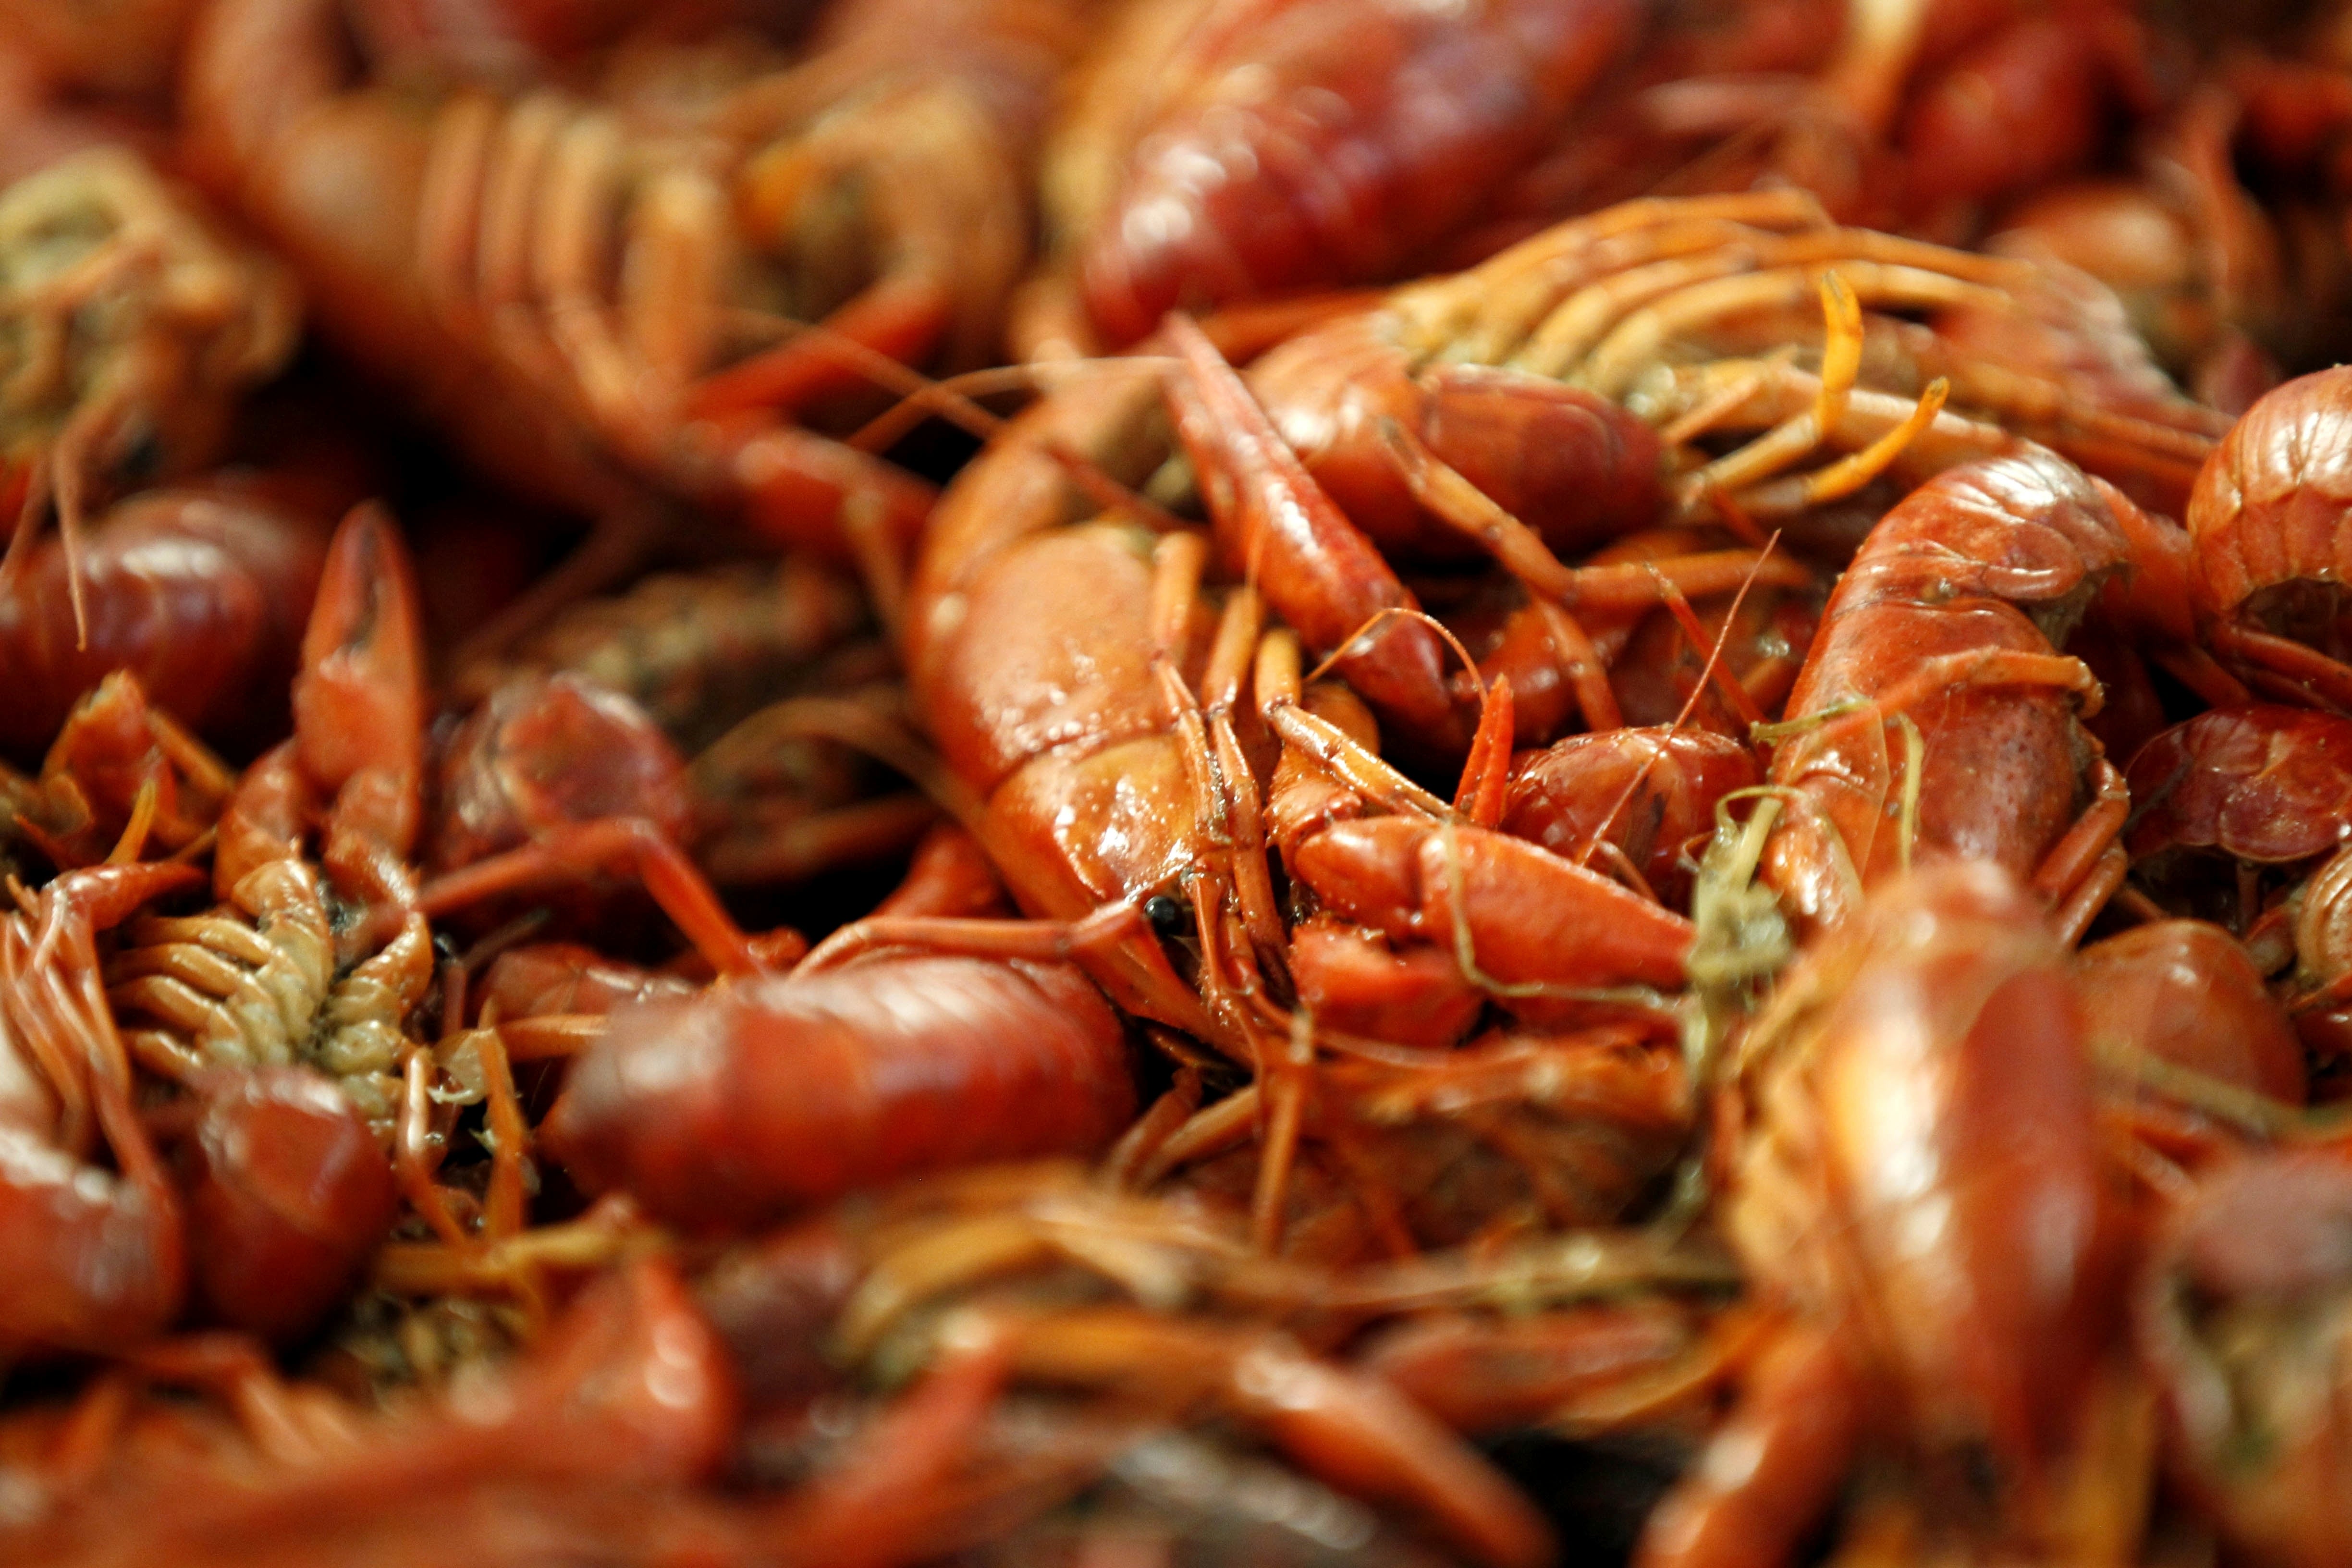 Drought pinched Louisiana's crawfish harvest, but mudbug fans are  weathering the shortage